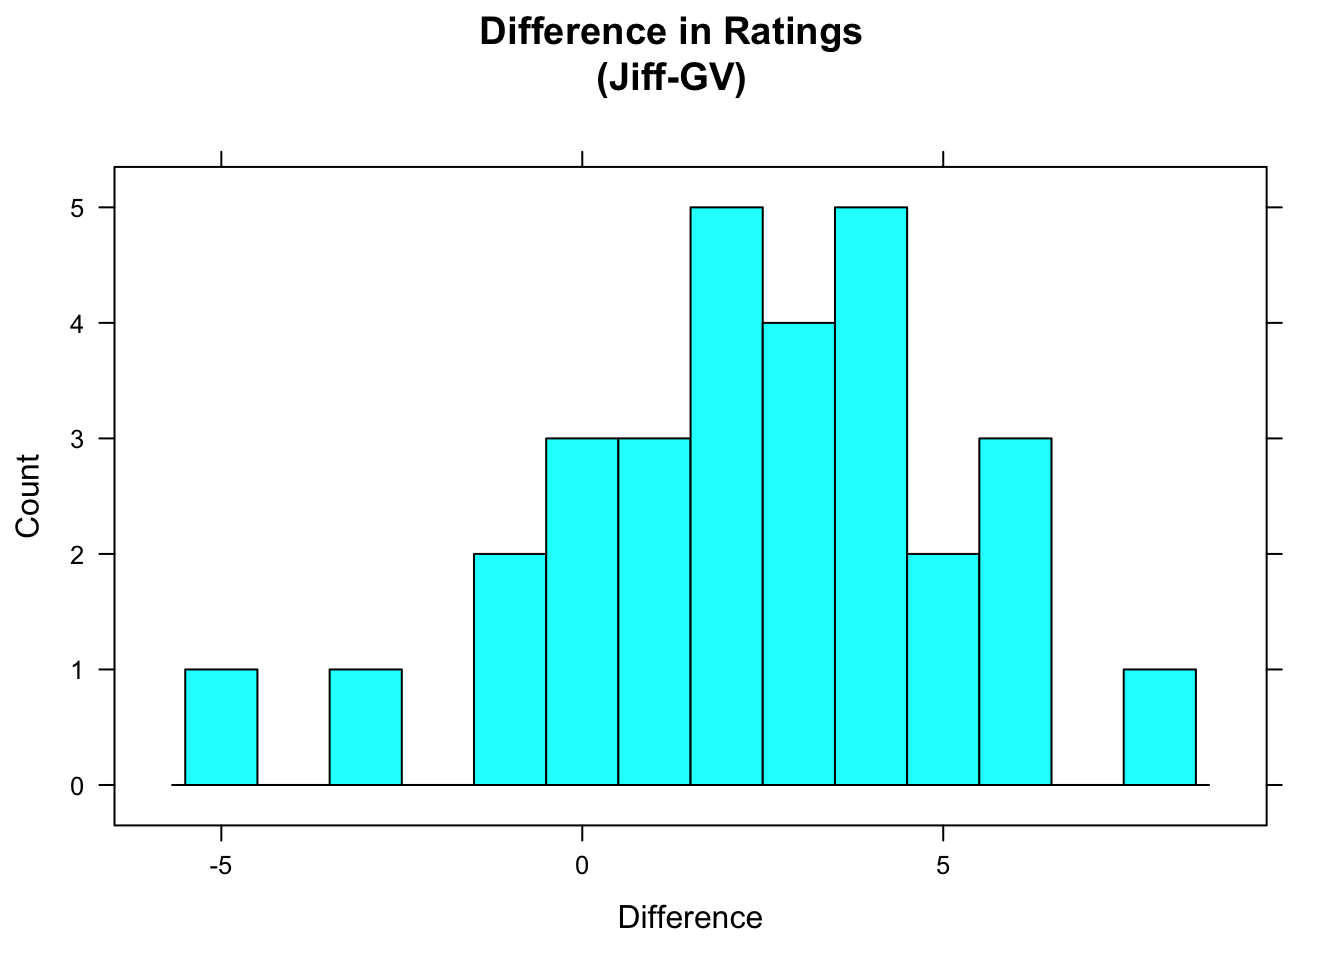 Ratings Difference.  Most of the differences are positive, indicating that subjects usually rated the Jiff-labeled peanut butter more highly.